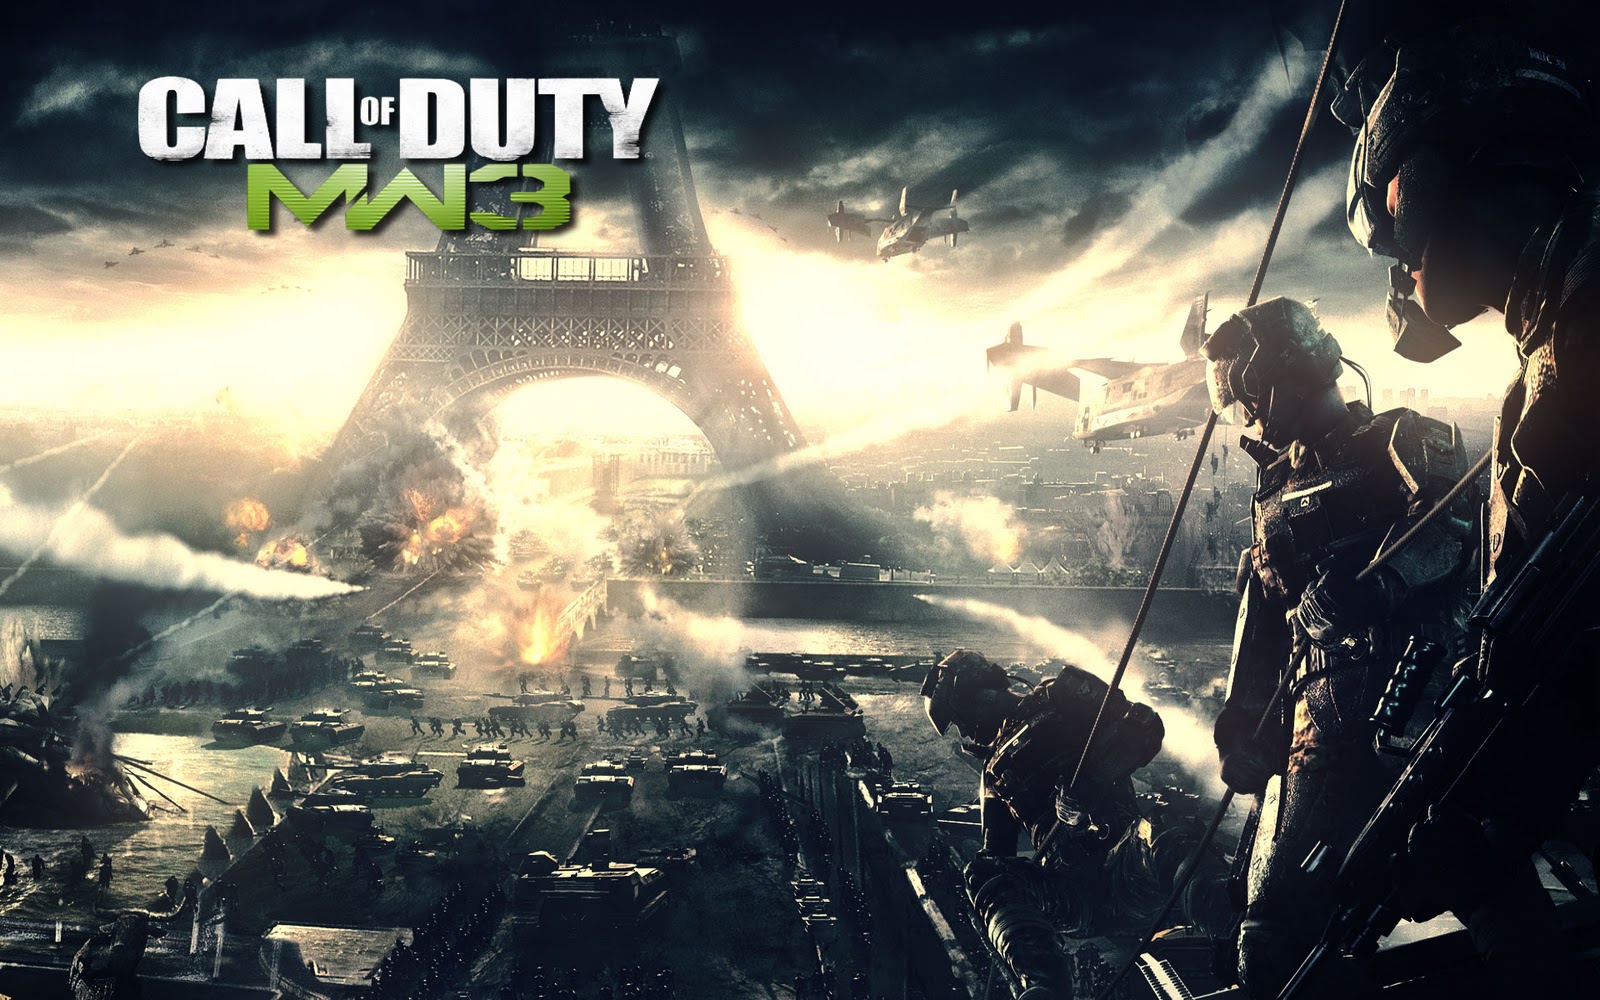 call of duty latest hd wallpapers call of duty latest hd wallpapers 1600x1000